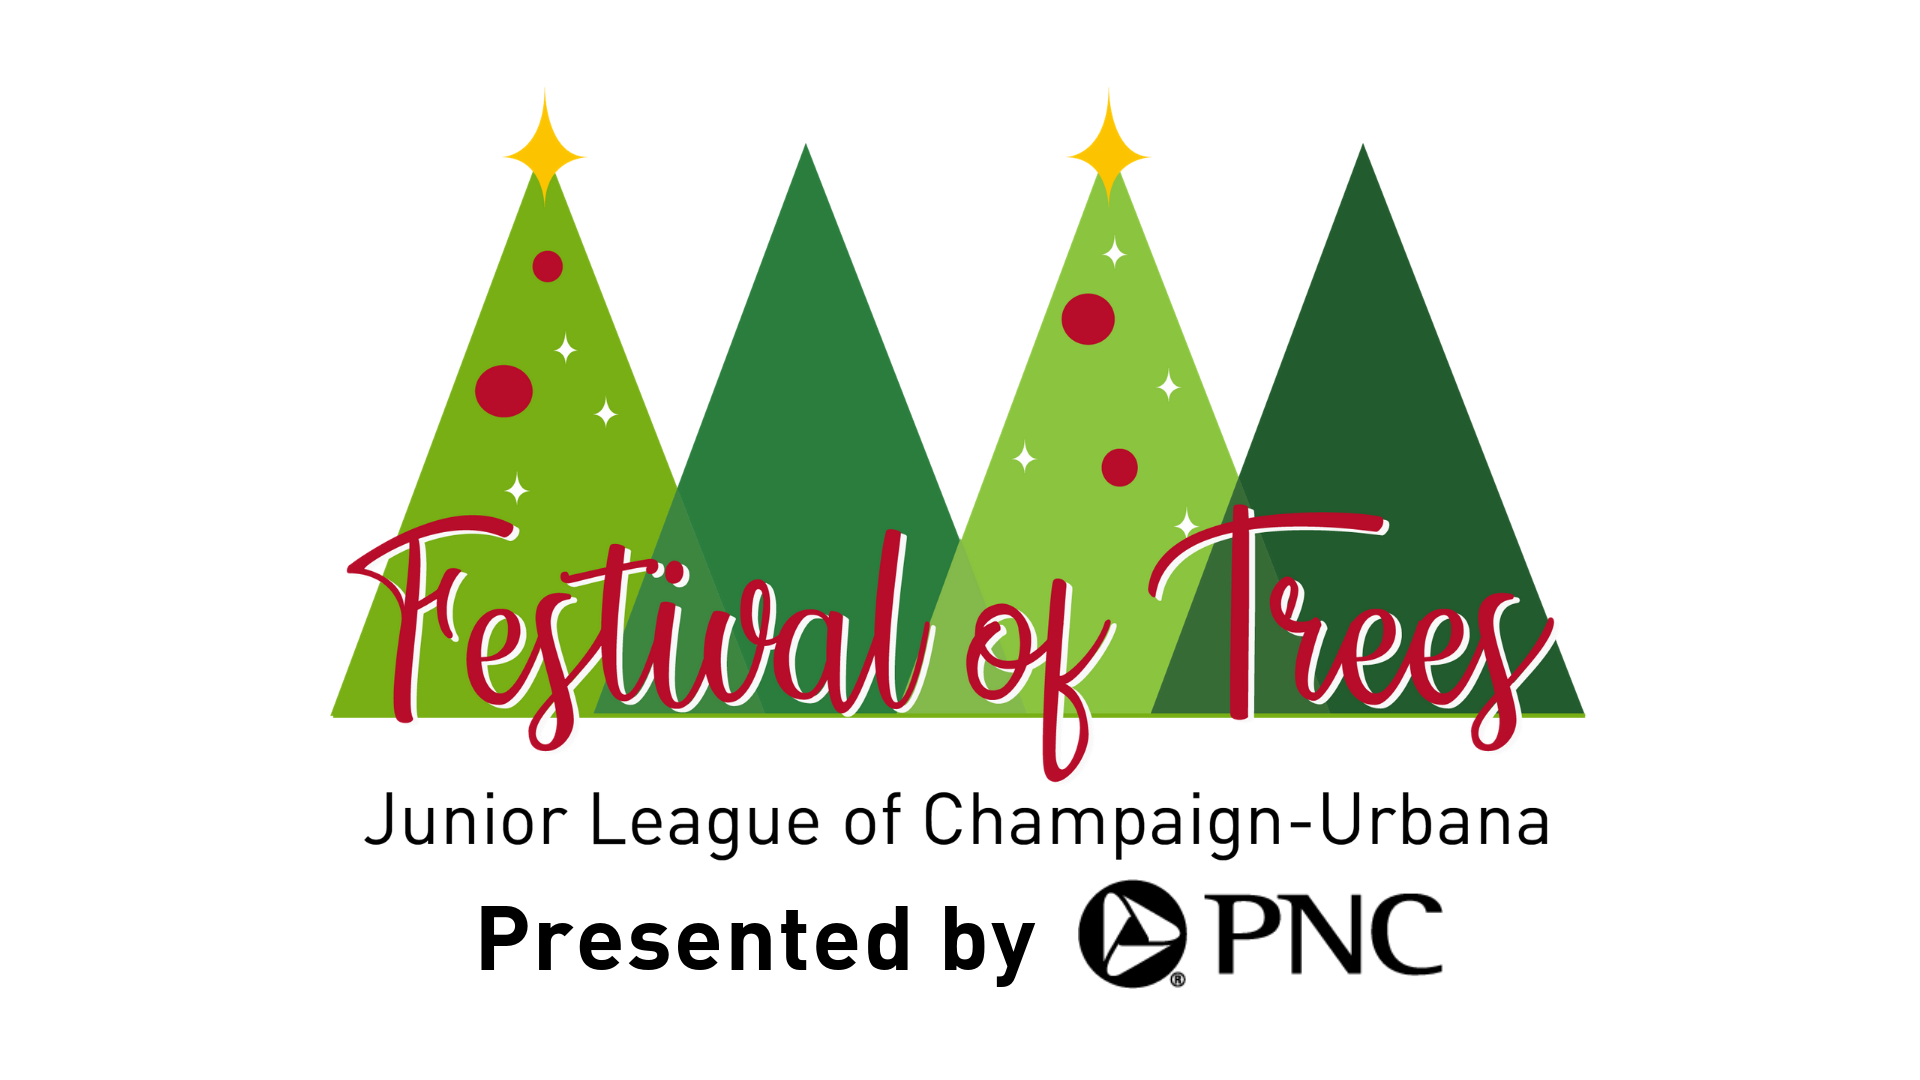 The 23rd Annual Festival of Trees happening November 17-18